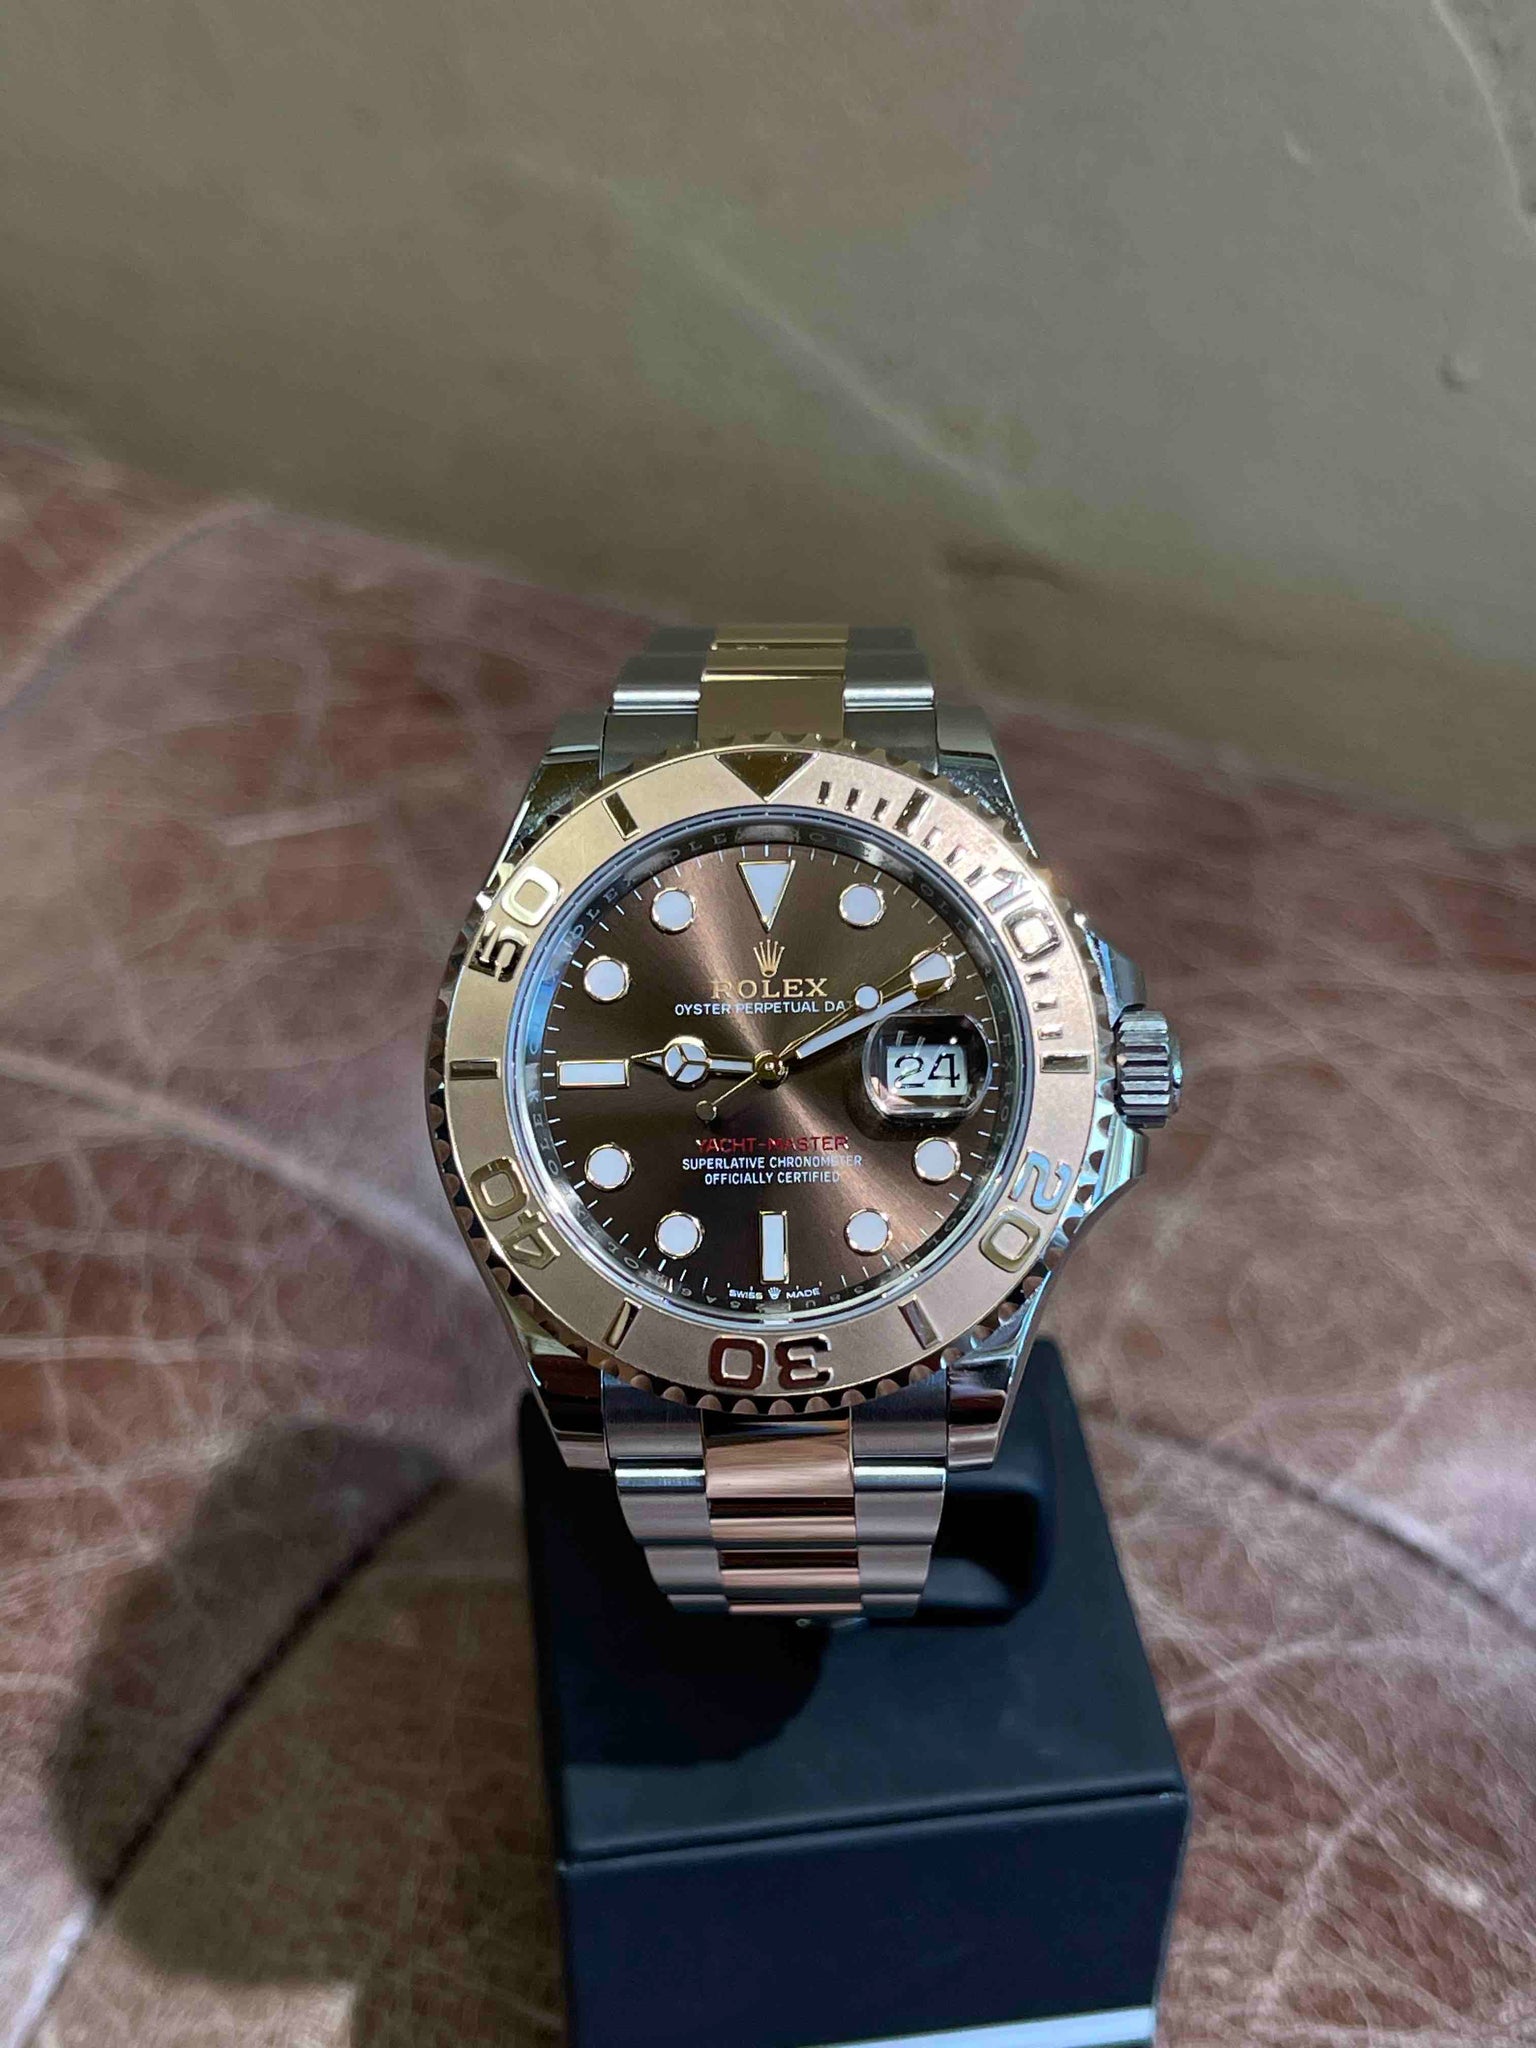 rolex yacht master two tone